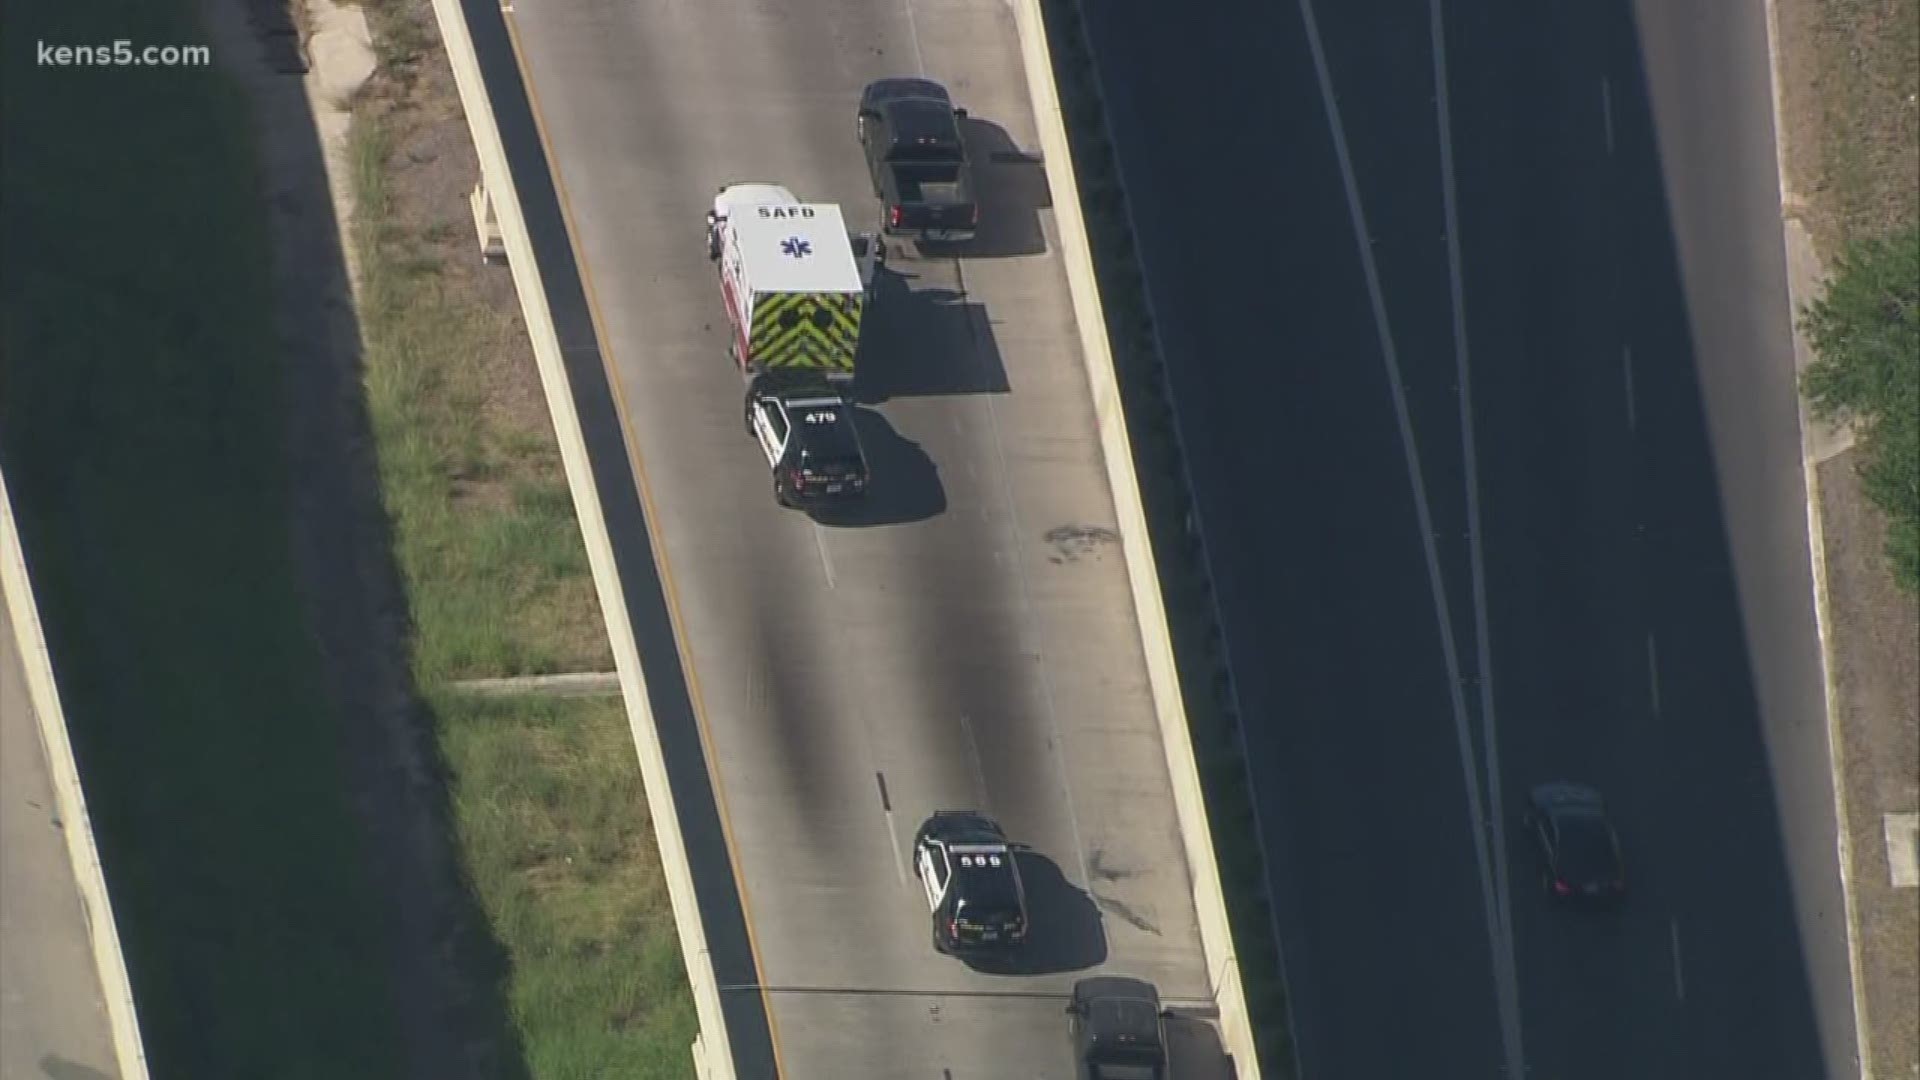 A suspect stole a SAFD medic unit, leading police on a chase. The suspect is now in custody.